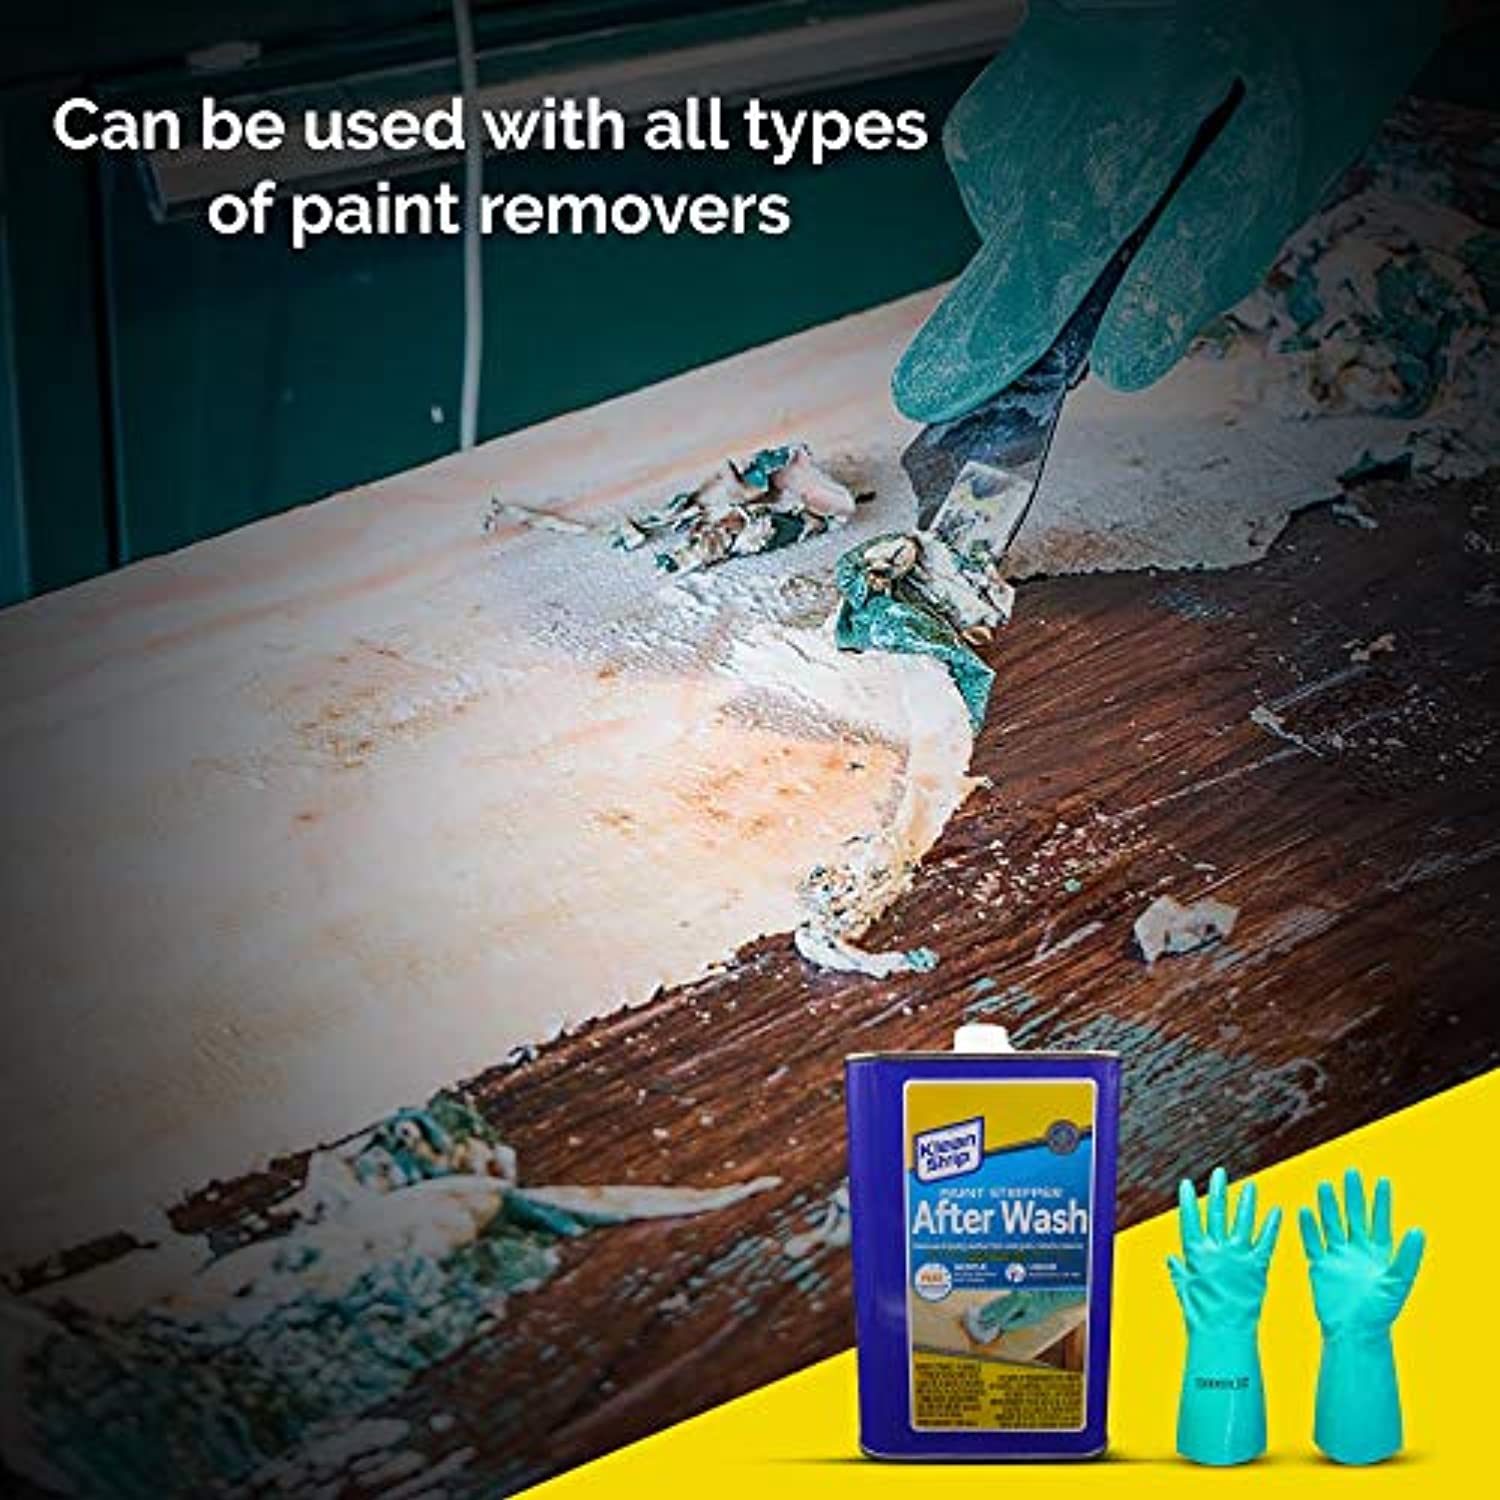 Klean-Strip Paint Stripper After Wash Eliminate Stubborn Paint residues Easier to Apply and give Protective Qualities Now Comes with Centaurus AZ Chemical Resistant Gloves, 1 Quart